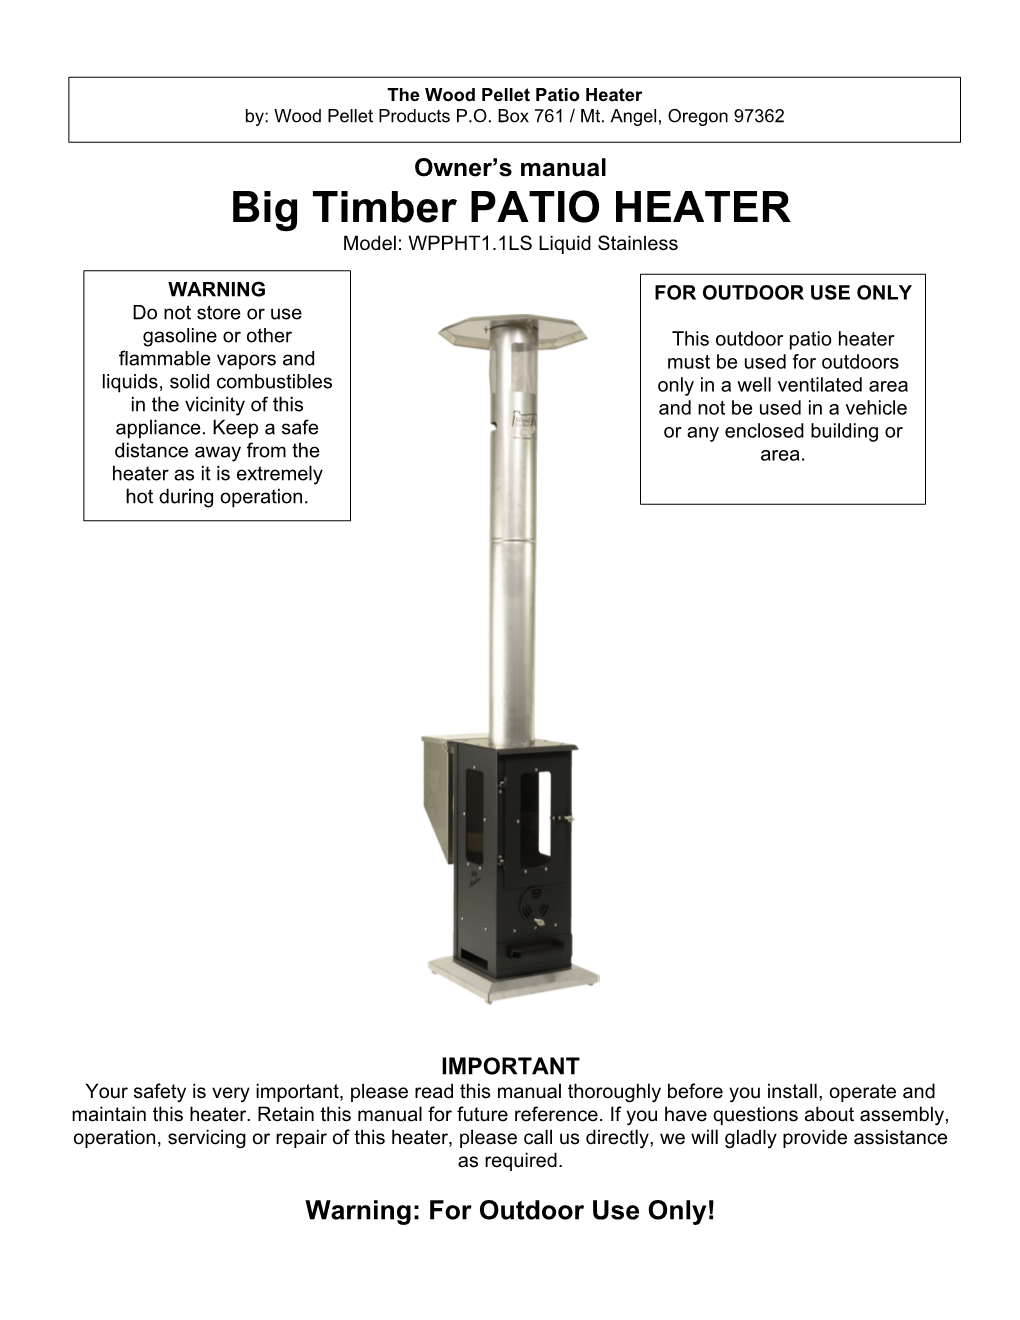 Big Timber PATIO HEATER Model: WPPHT1.1LS Liquid Stainless